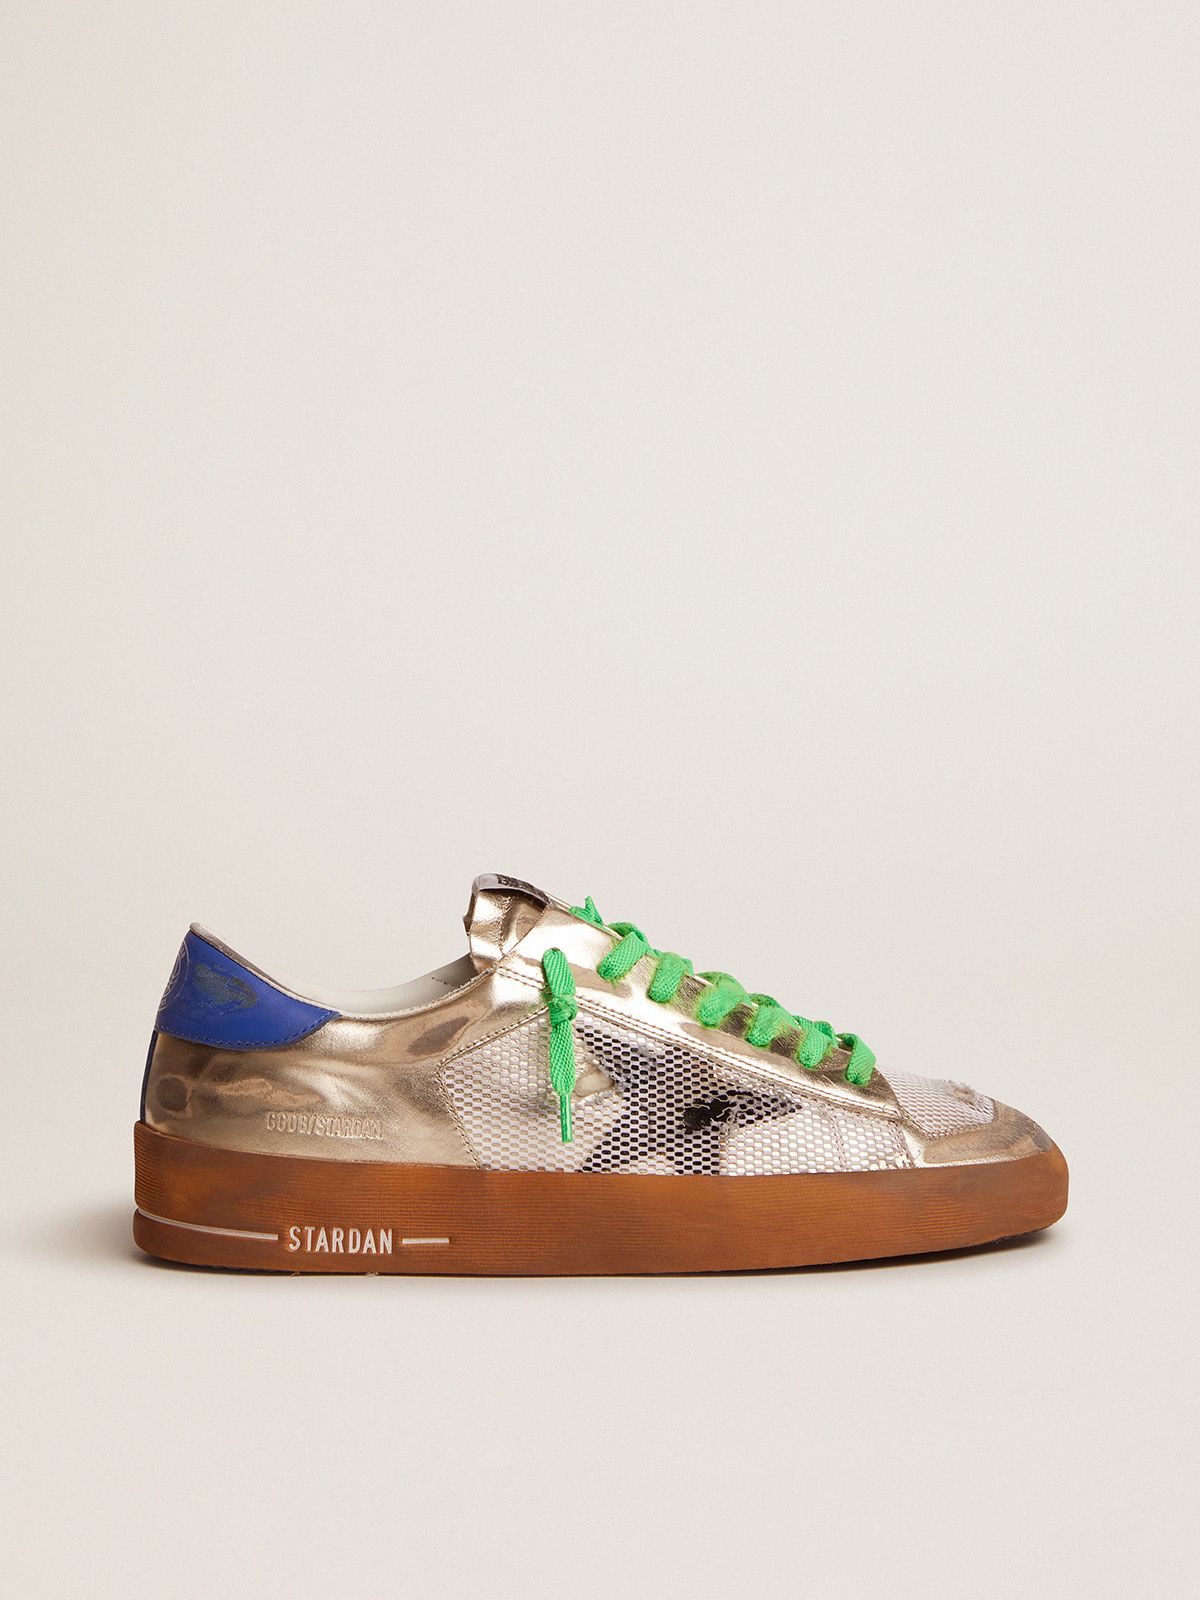 golden goose tab with blue and mesh in an LAB laminated Stardan leather sneakers electric heel